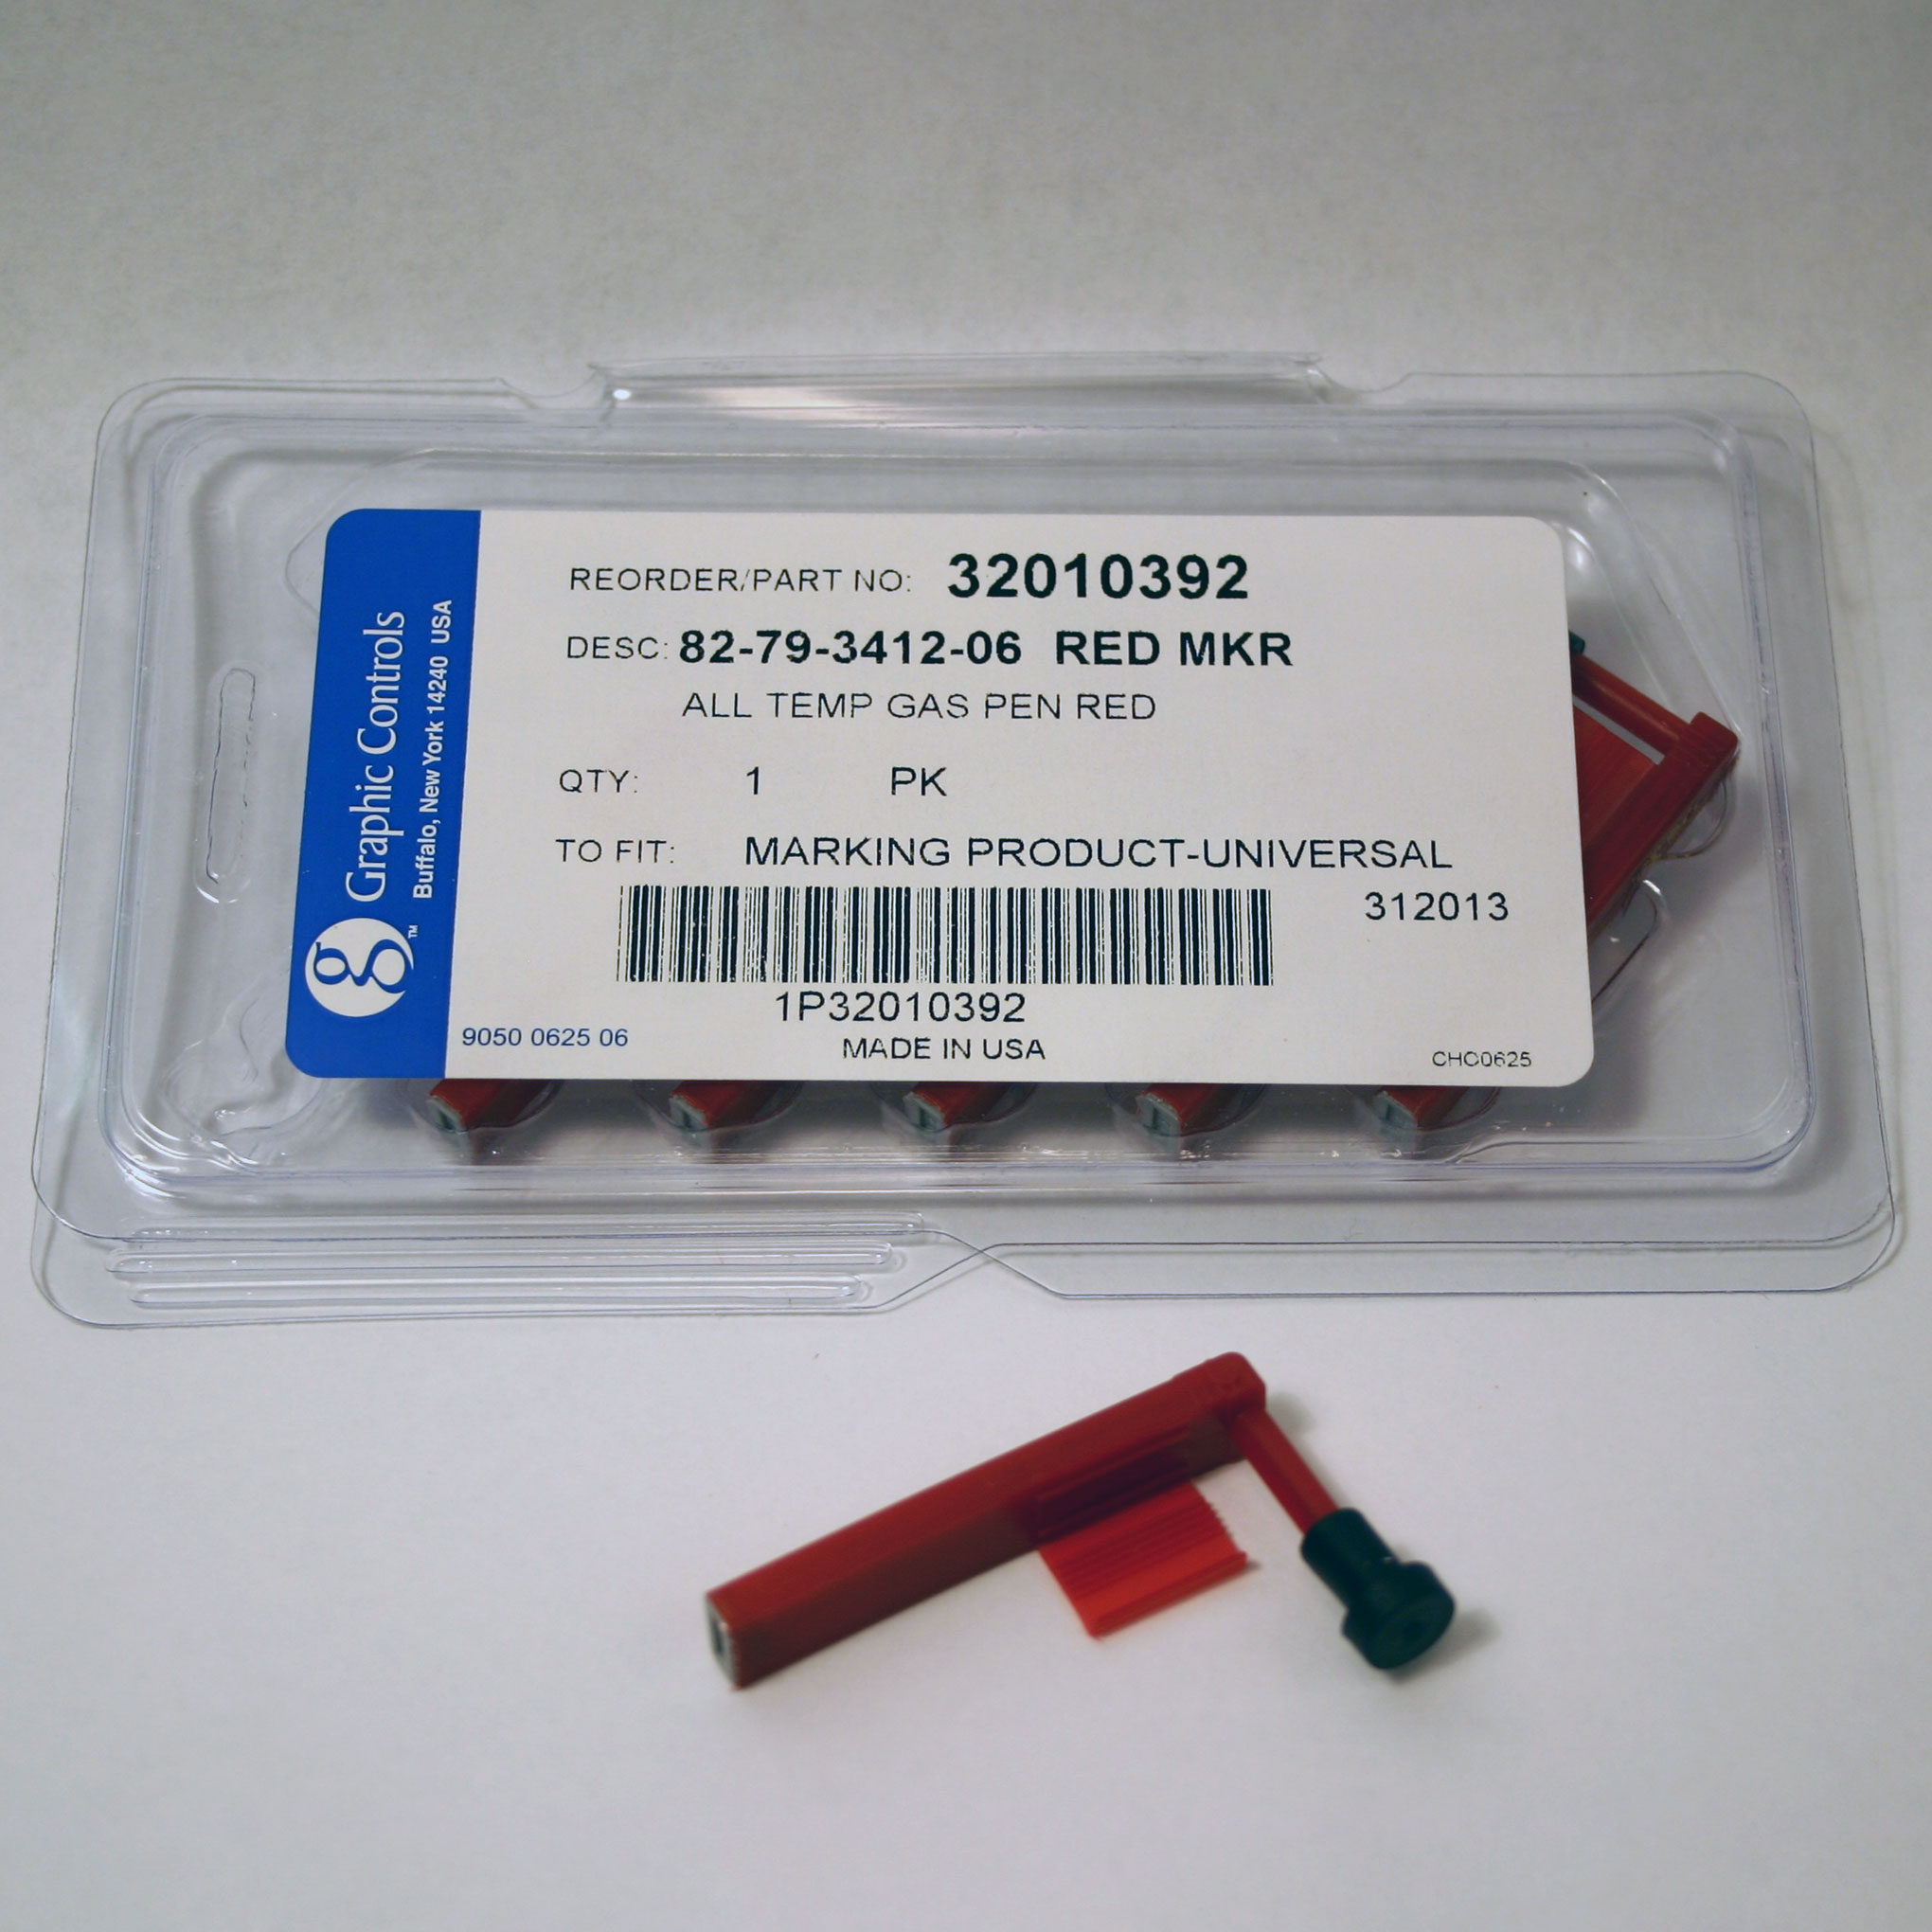 MP-MARKING PRODUCT-UNIVERSAL MP  82-79-3412-06  RED MKR